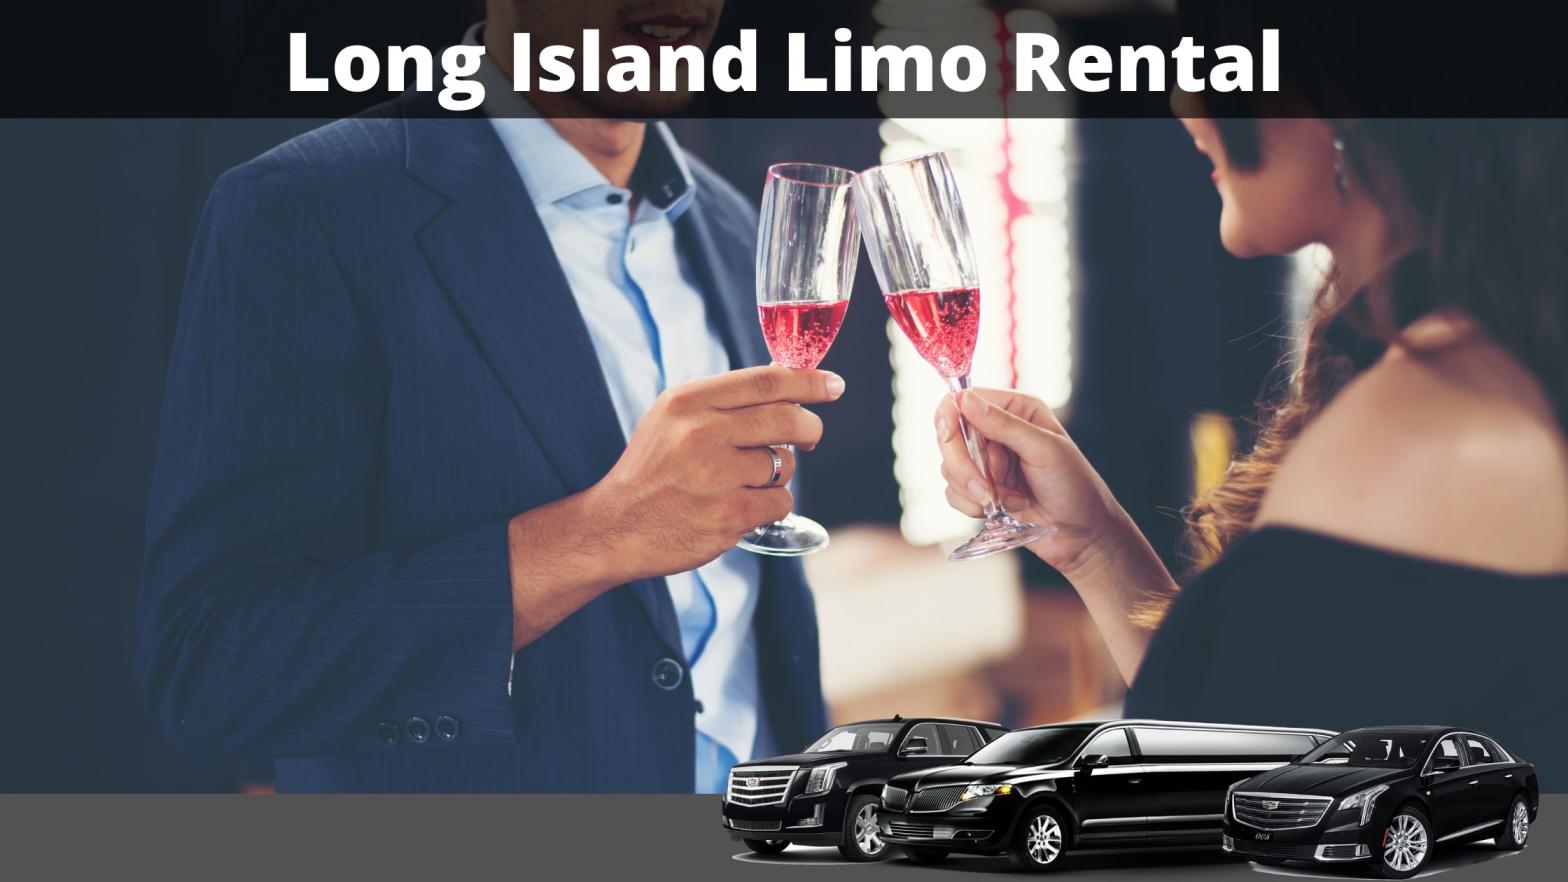 How to Plan a Memorable Wine Tour with a Couples Wine Tours Limo